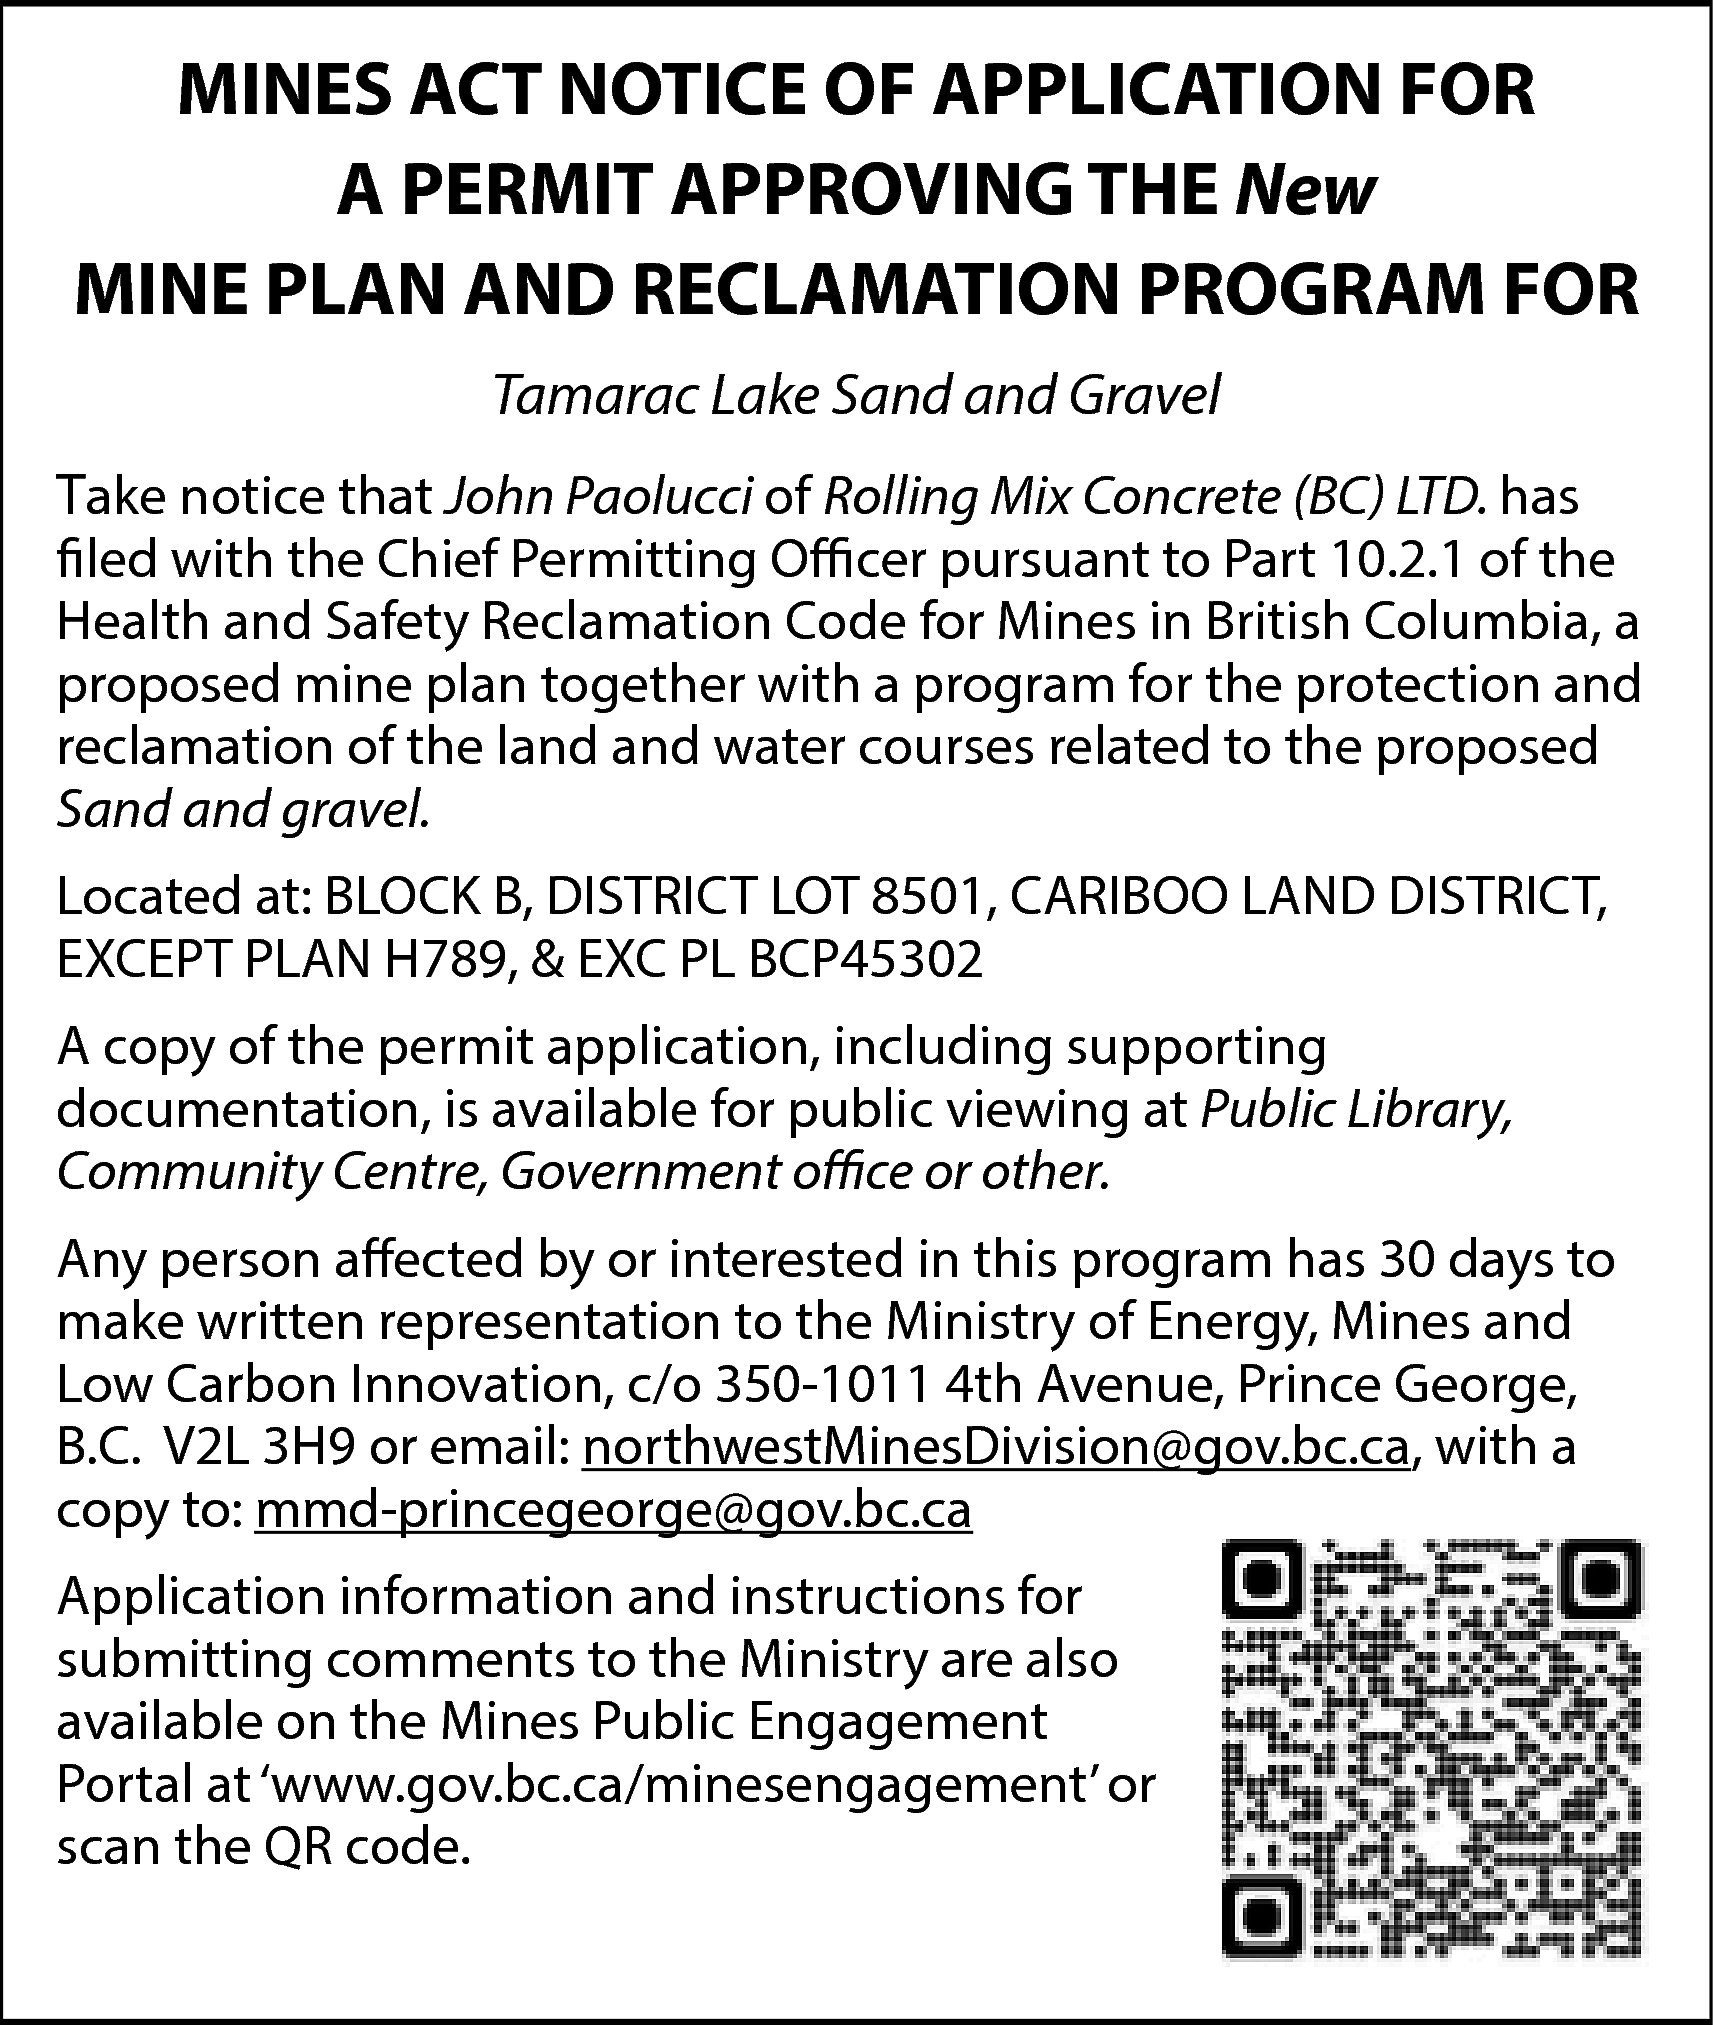 MINES ACT NOTICE OF APPLICATION  MINES ACT NOTICE OF APPLICATION FOR  A PERMIT APPROVING THE New  MINE PLAN AND RECLAMATION PROGRAM FOR  Tamarac Lake Sand and Gravel  Take notice that John Paolucci of Rolling Mix Concrete (BC) LTD. has  filed with the Chief Permitting Officer pursuant to Part 10.2.1 of the  Health and Safety Reclamation Code for Mines in British Columbia, a  proposed mine plan together with a program for the protection and  reclamation of the land and water courses related to the proposed  Sand and gravel.  Located at: BLOCK B, DISTRICT LOT 8501, CARIBOO LAND DISTRICT,  EXCEPT PLAN H789, & EXC PL BCP45302  A copy of the permit application, including supporting  documentation, is available for public viewing at Public Library,  Community Centre, Government office or other.  Any person affected by or interested in this program has 30 days to  make written representation to the Ministry of Energy, Mines and  Low Carbon Innovation, c/o 350-1011 4th Avenue, Prince George,  B.C. V2L 3H9 or email: northwestMinesDivision@gov.bc.ca, with a  copy to: mmd-princegeorge@gov.bc.ca  Application information and instructions for  submitting comments to the Ministry are also  available on the Mines Public Engagement  Portal at ‘www.gov.bc.ca/minesengagement’ or  scan the QR code.    